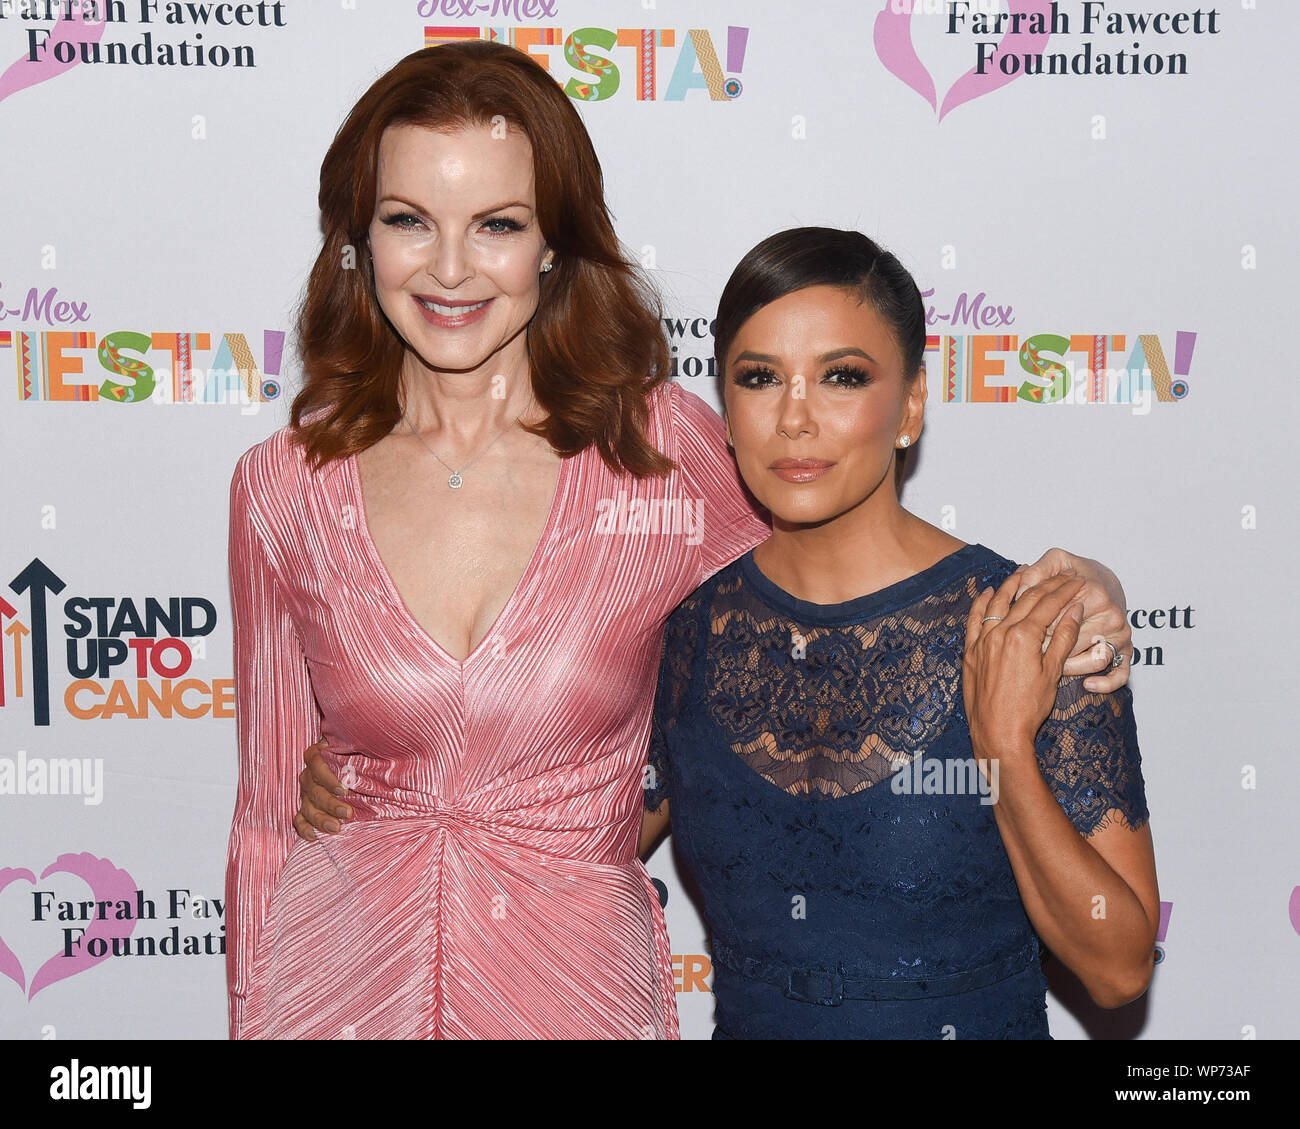 Beverly Hills, USA. 06th Sep, 2019. Marcia Cross and Eva Longoria attends at the Farrah Fawcett Foundation's 'Tex-Mex Fiesta' honoring Marcia Cross at Wallis Annenberg Center for the Performing Arts in Beverly Hills, California, on September 6, 2019. Credit: The Photo Access/Alamy Live News Stock Photo